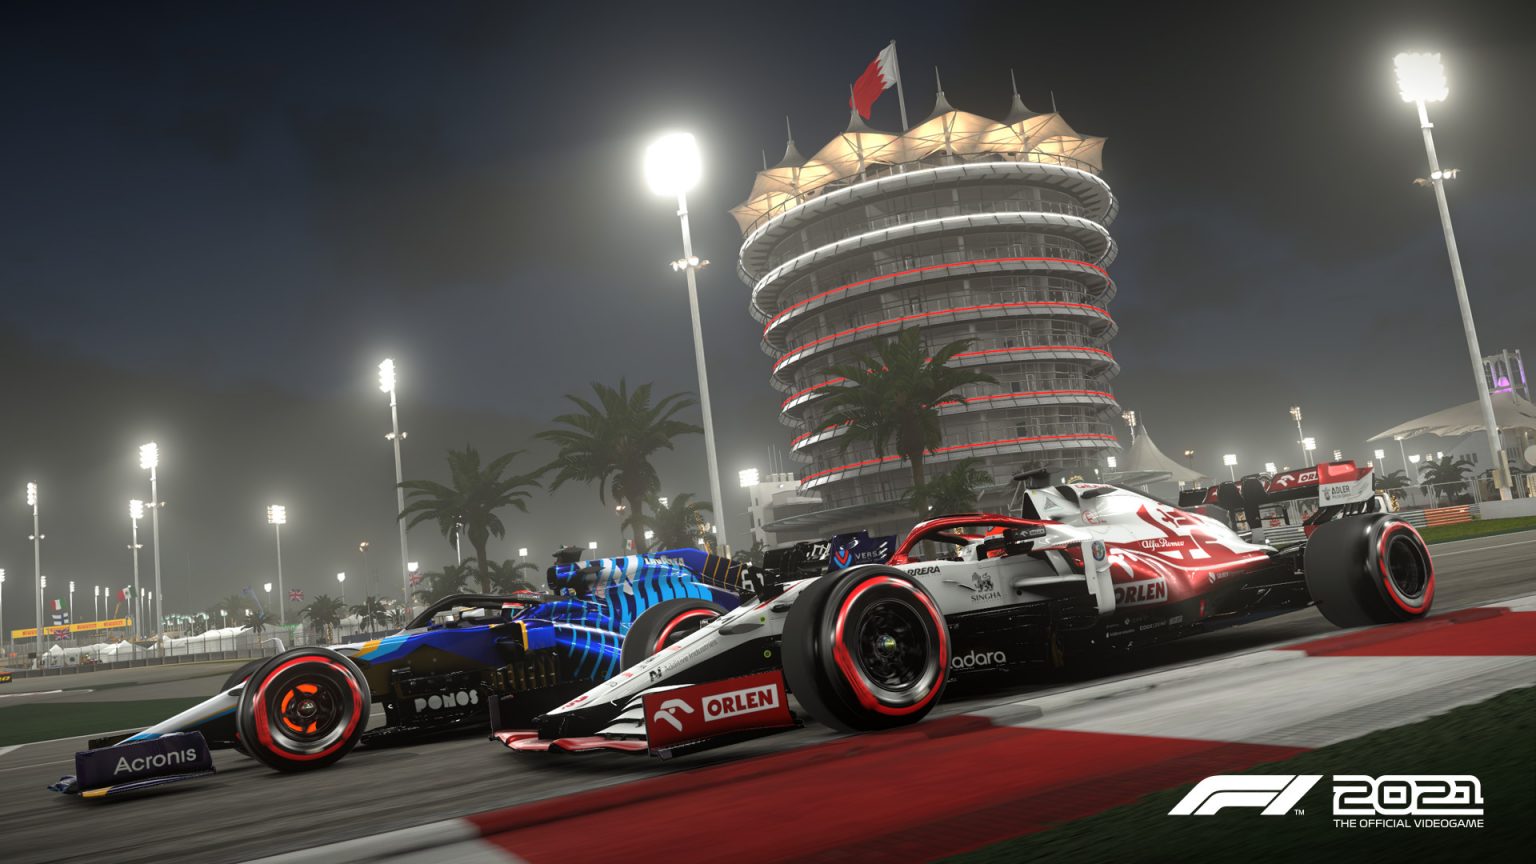 download game ppsspp f1 2011 iso